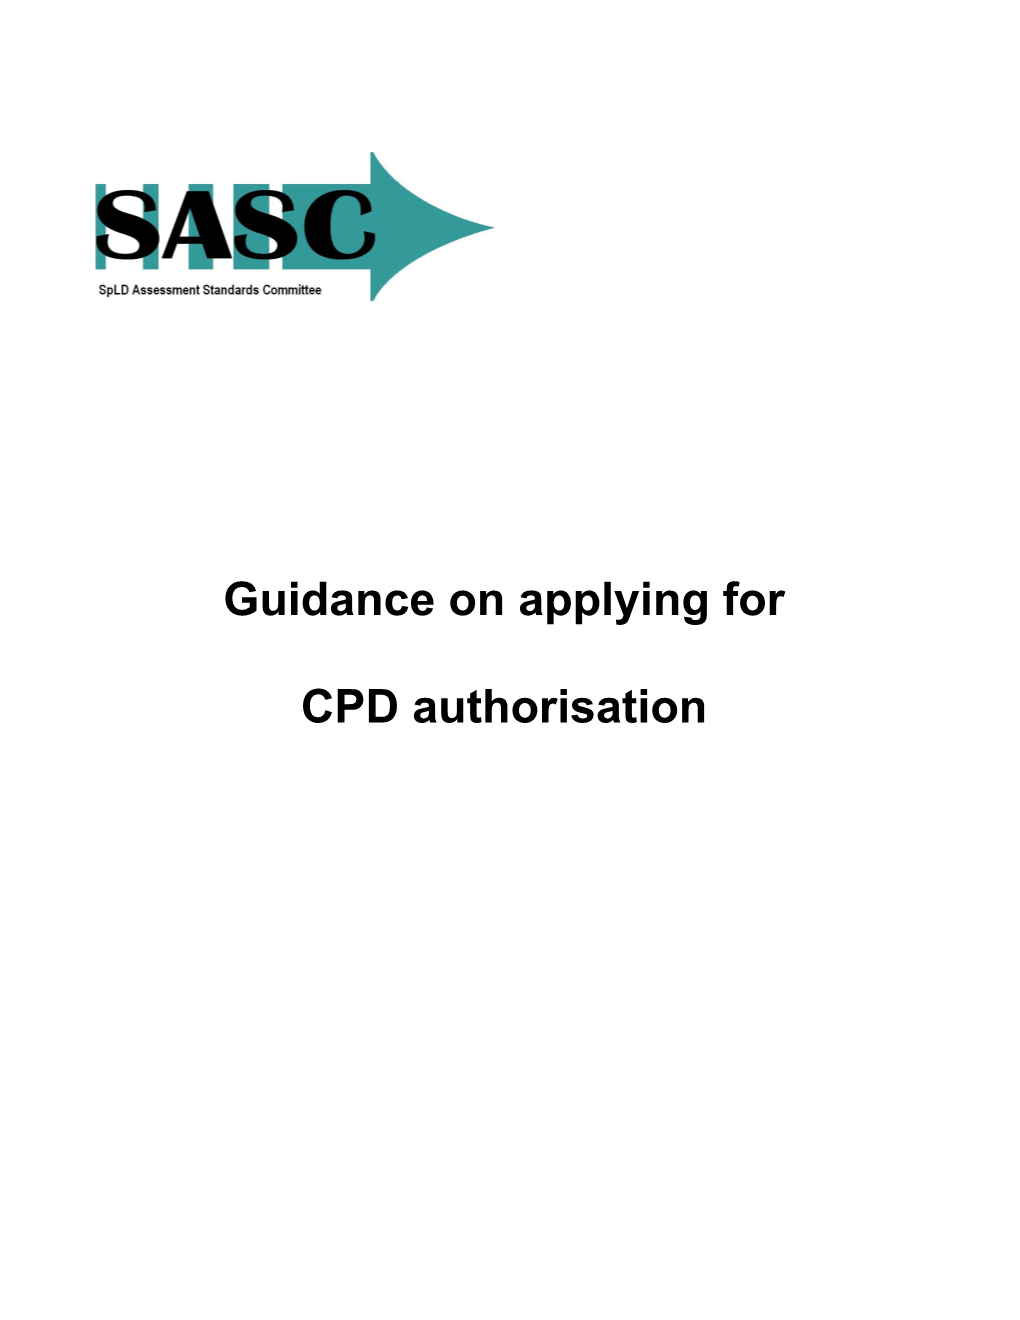 Becoming an External CPD Provider: Guidance on Applying for Authorisation